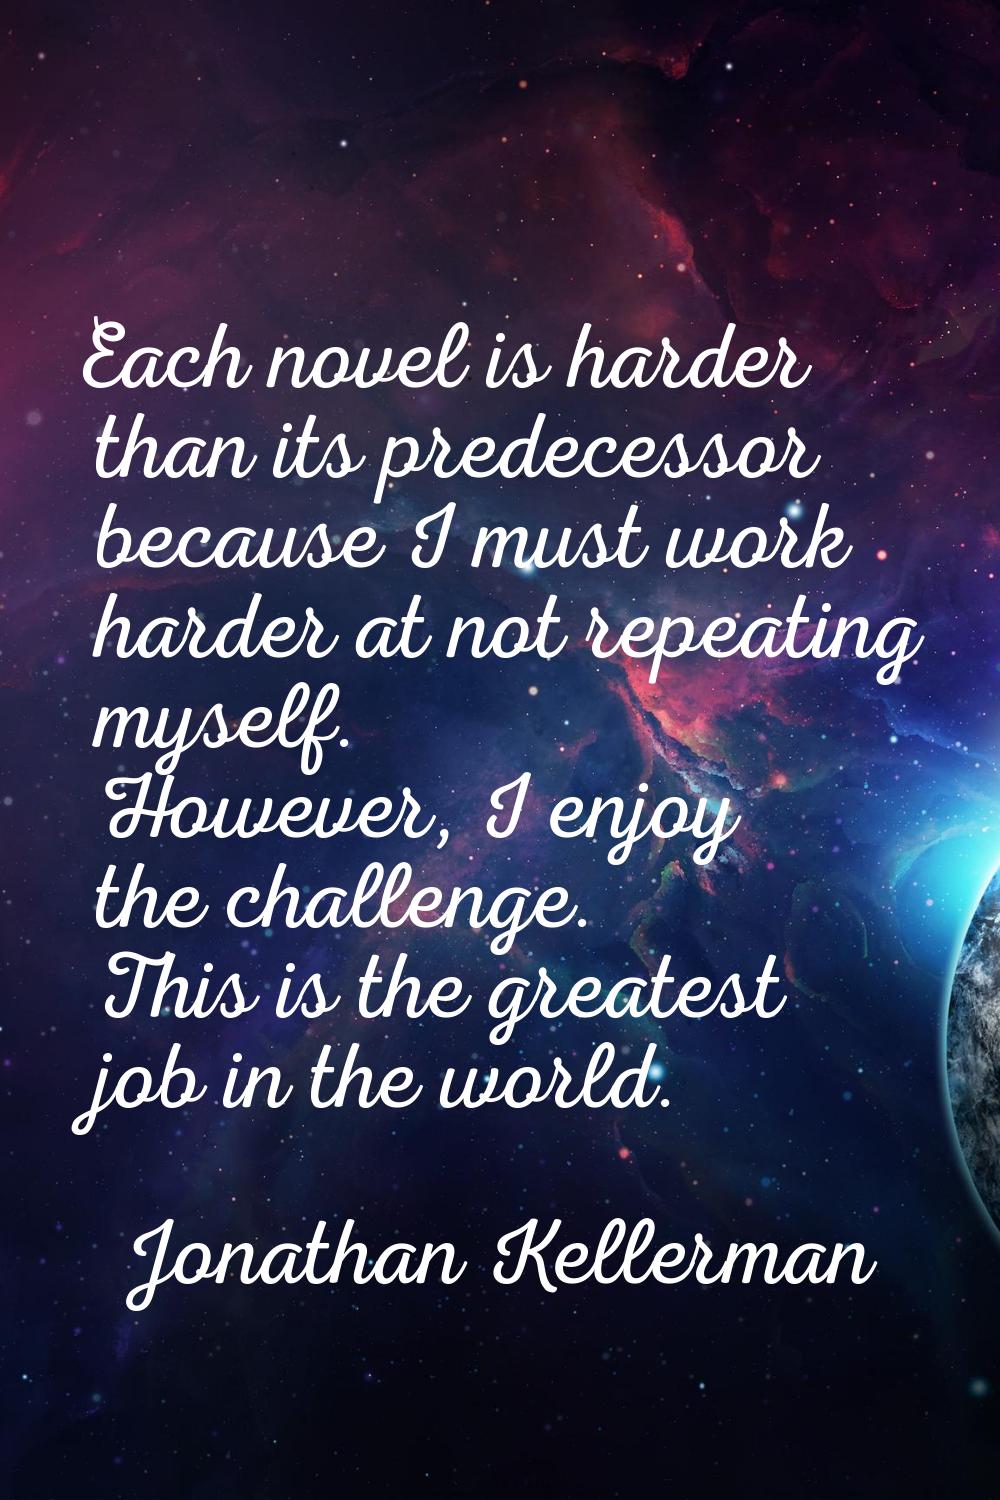 Each novel is harder than its predecessor because I must work harder at not repeating myself. Howev